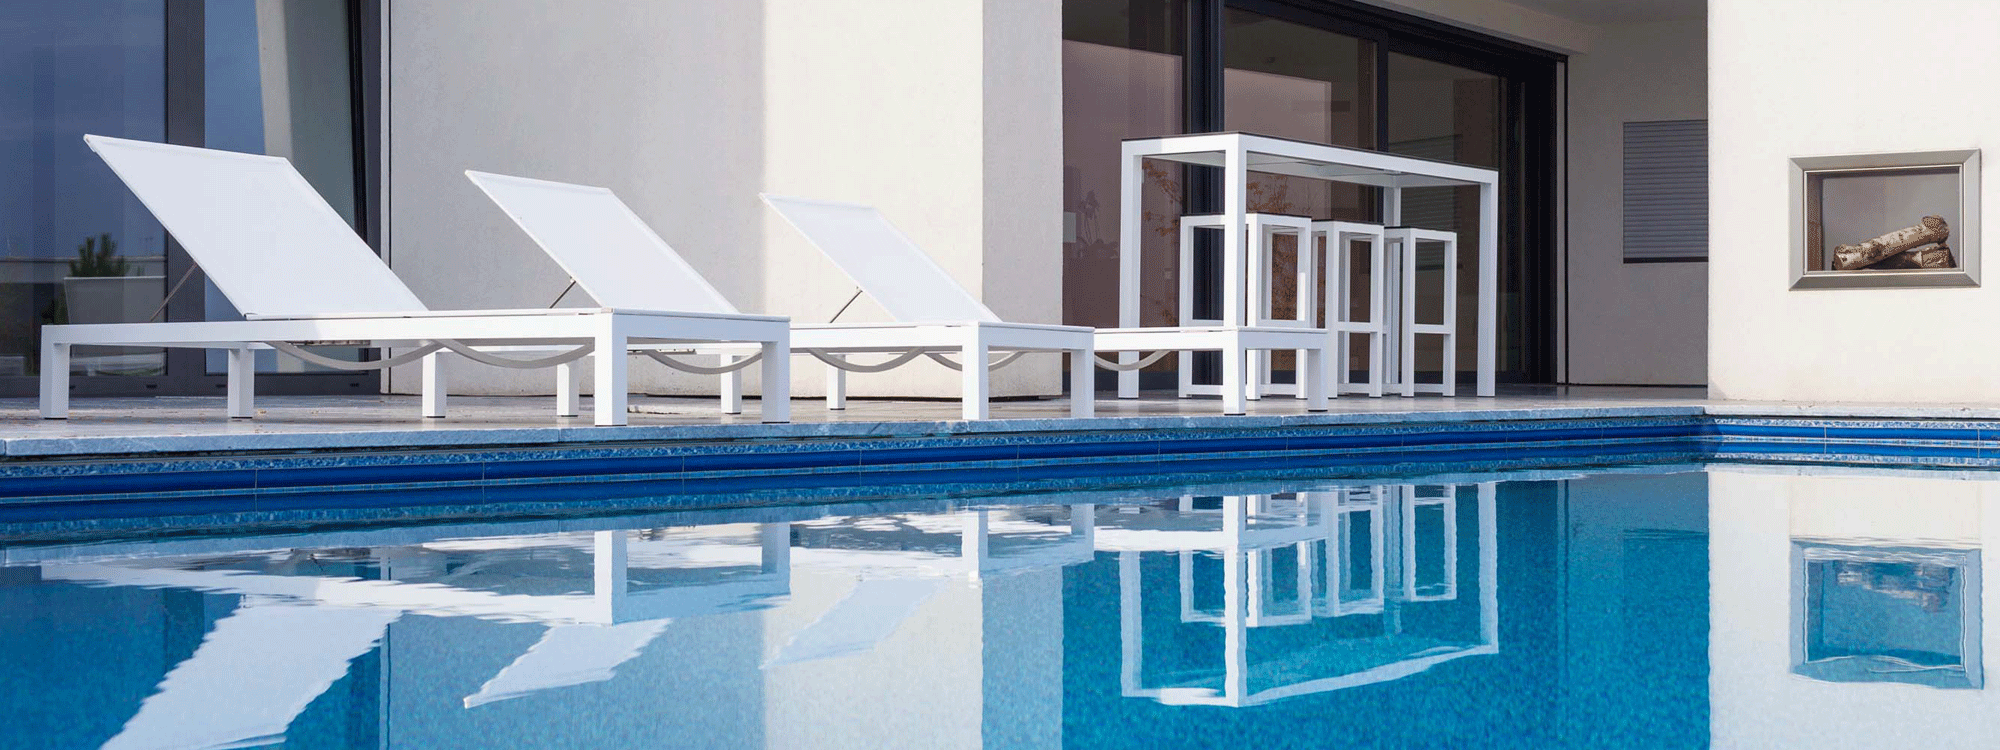 Image of Leuven white sun loungers and white bar furniture on chic poolside with furniture's reflection shown in the water